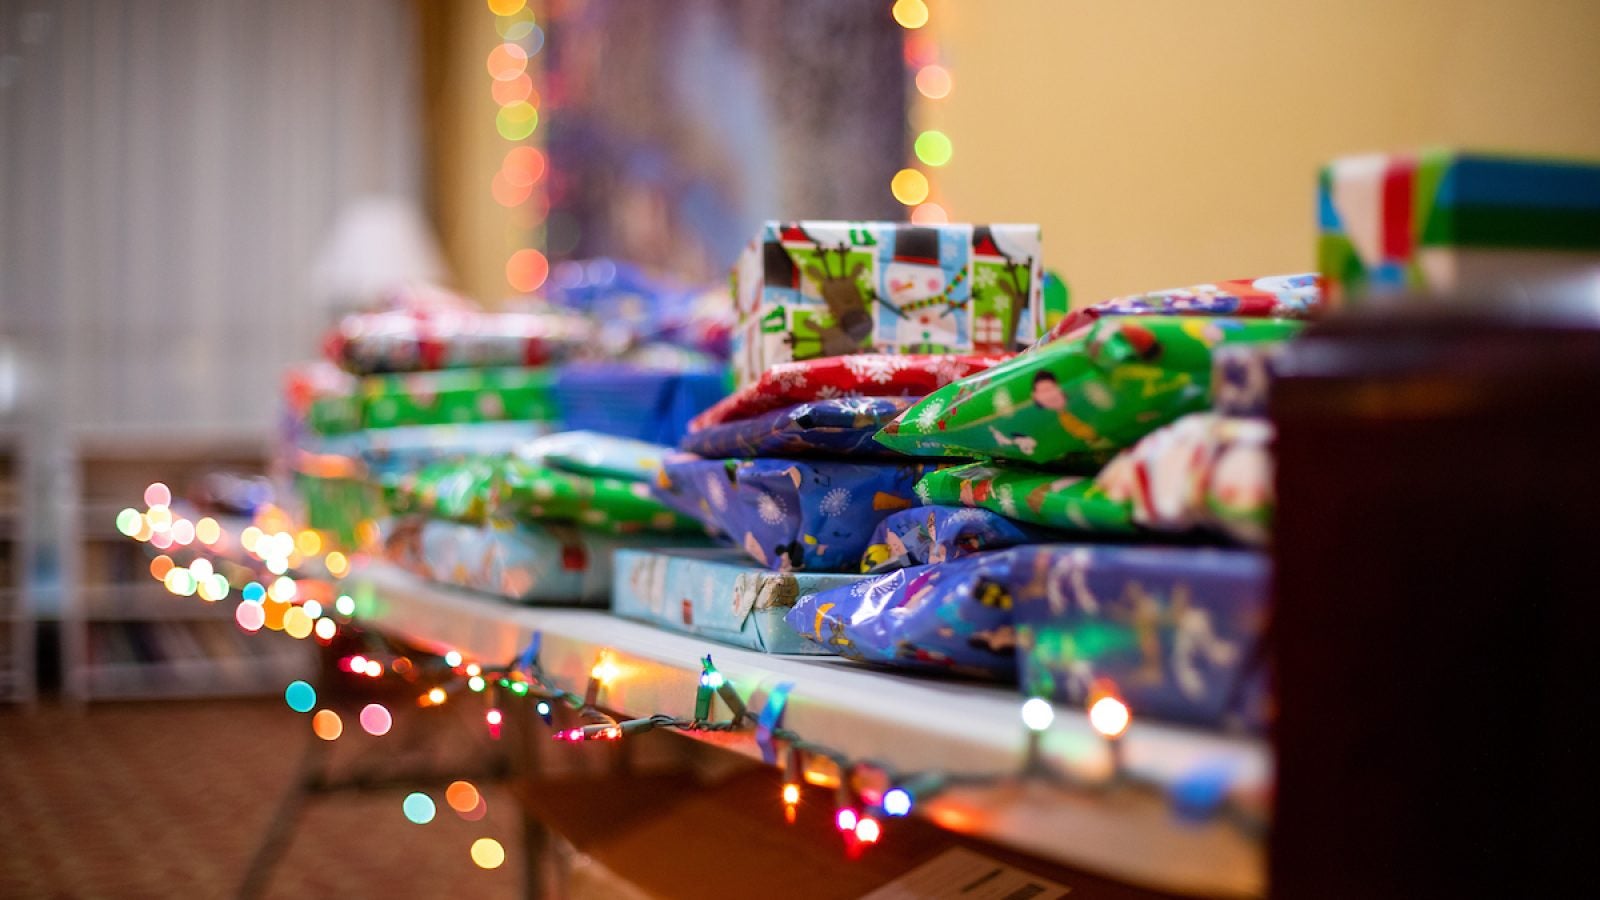 Gifts covered in colorful wrapping paper on top of a table with a string of twinkling lights